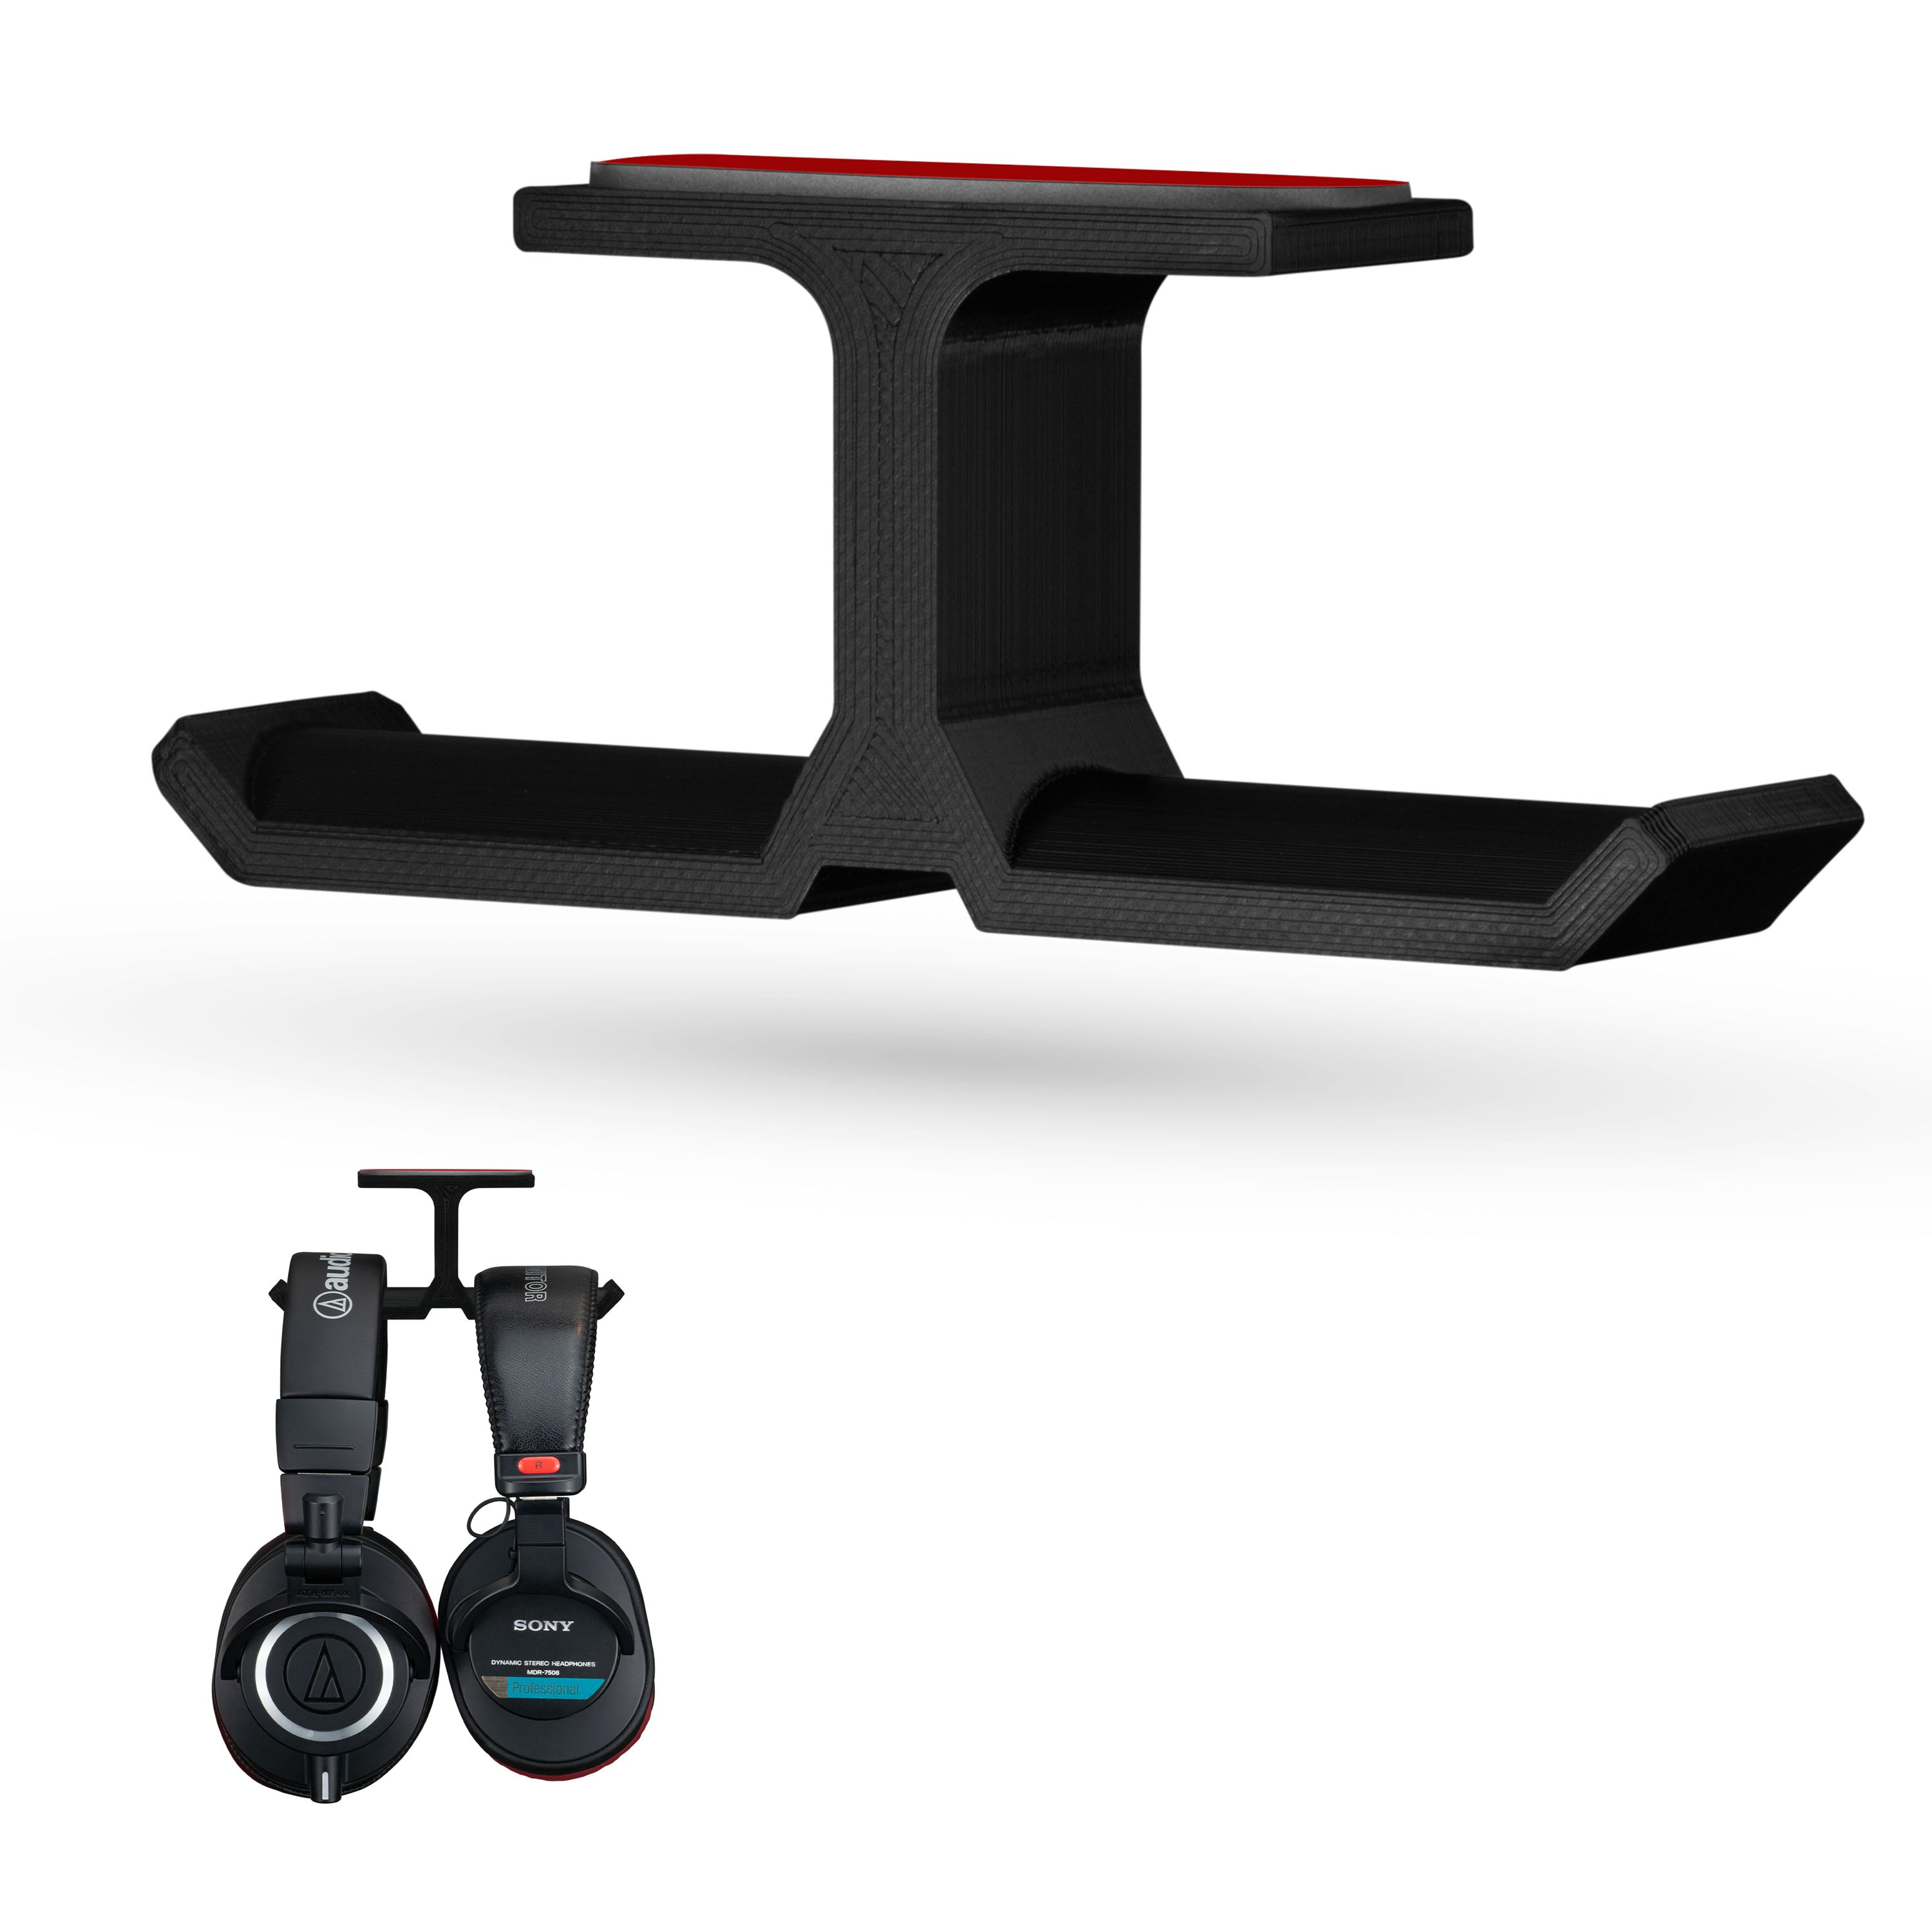 Headset Hanger for Desk: Declutter & Organize with Style!